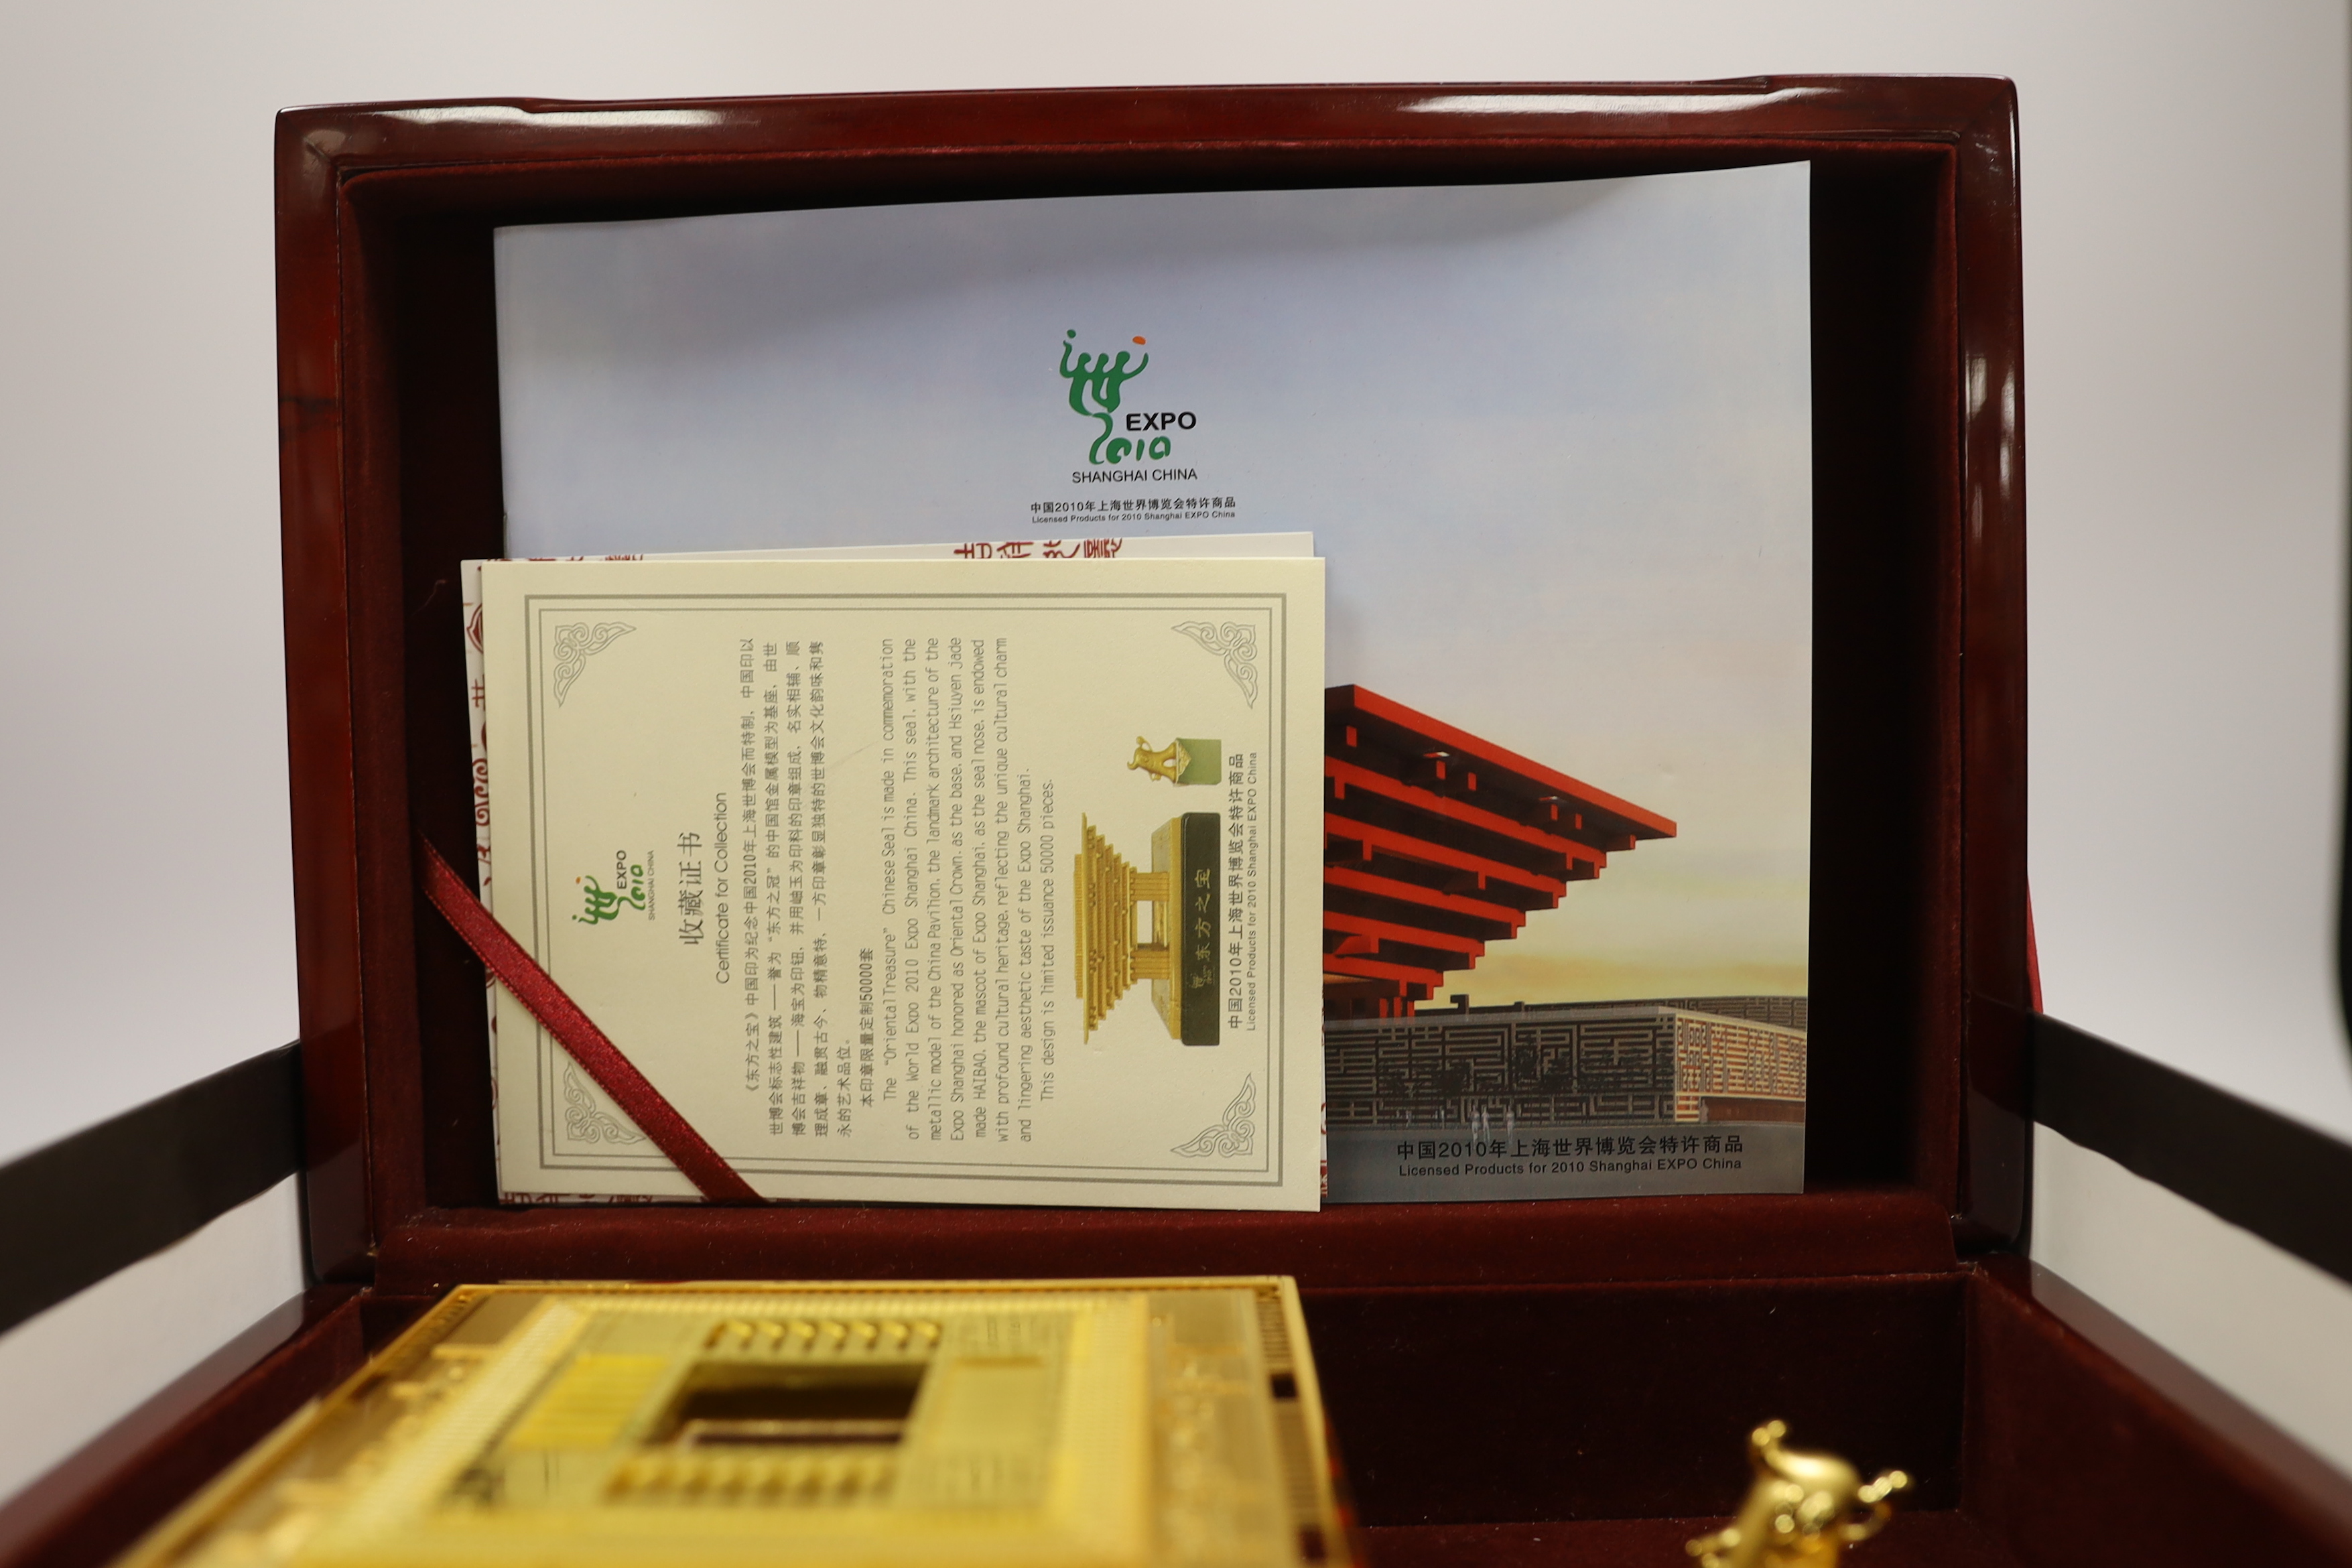 A cased Chinese Shanghai Expo 2010 model in gilt metal, 10cm high